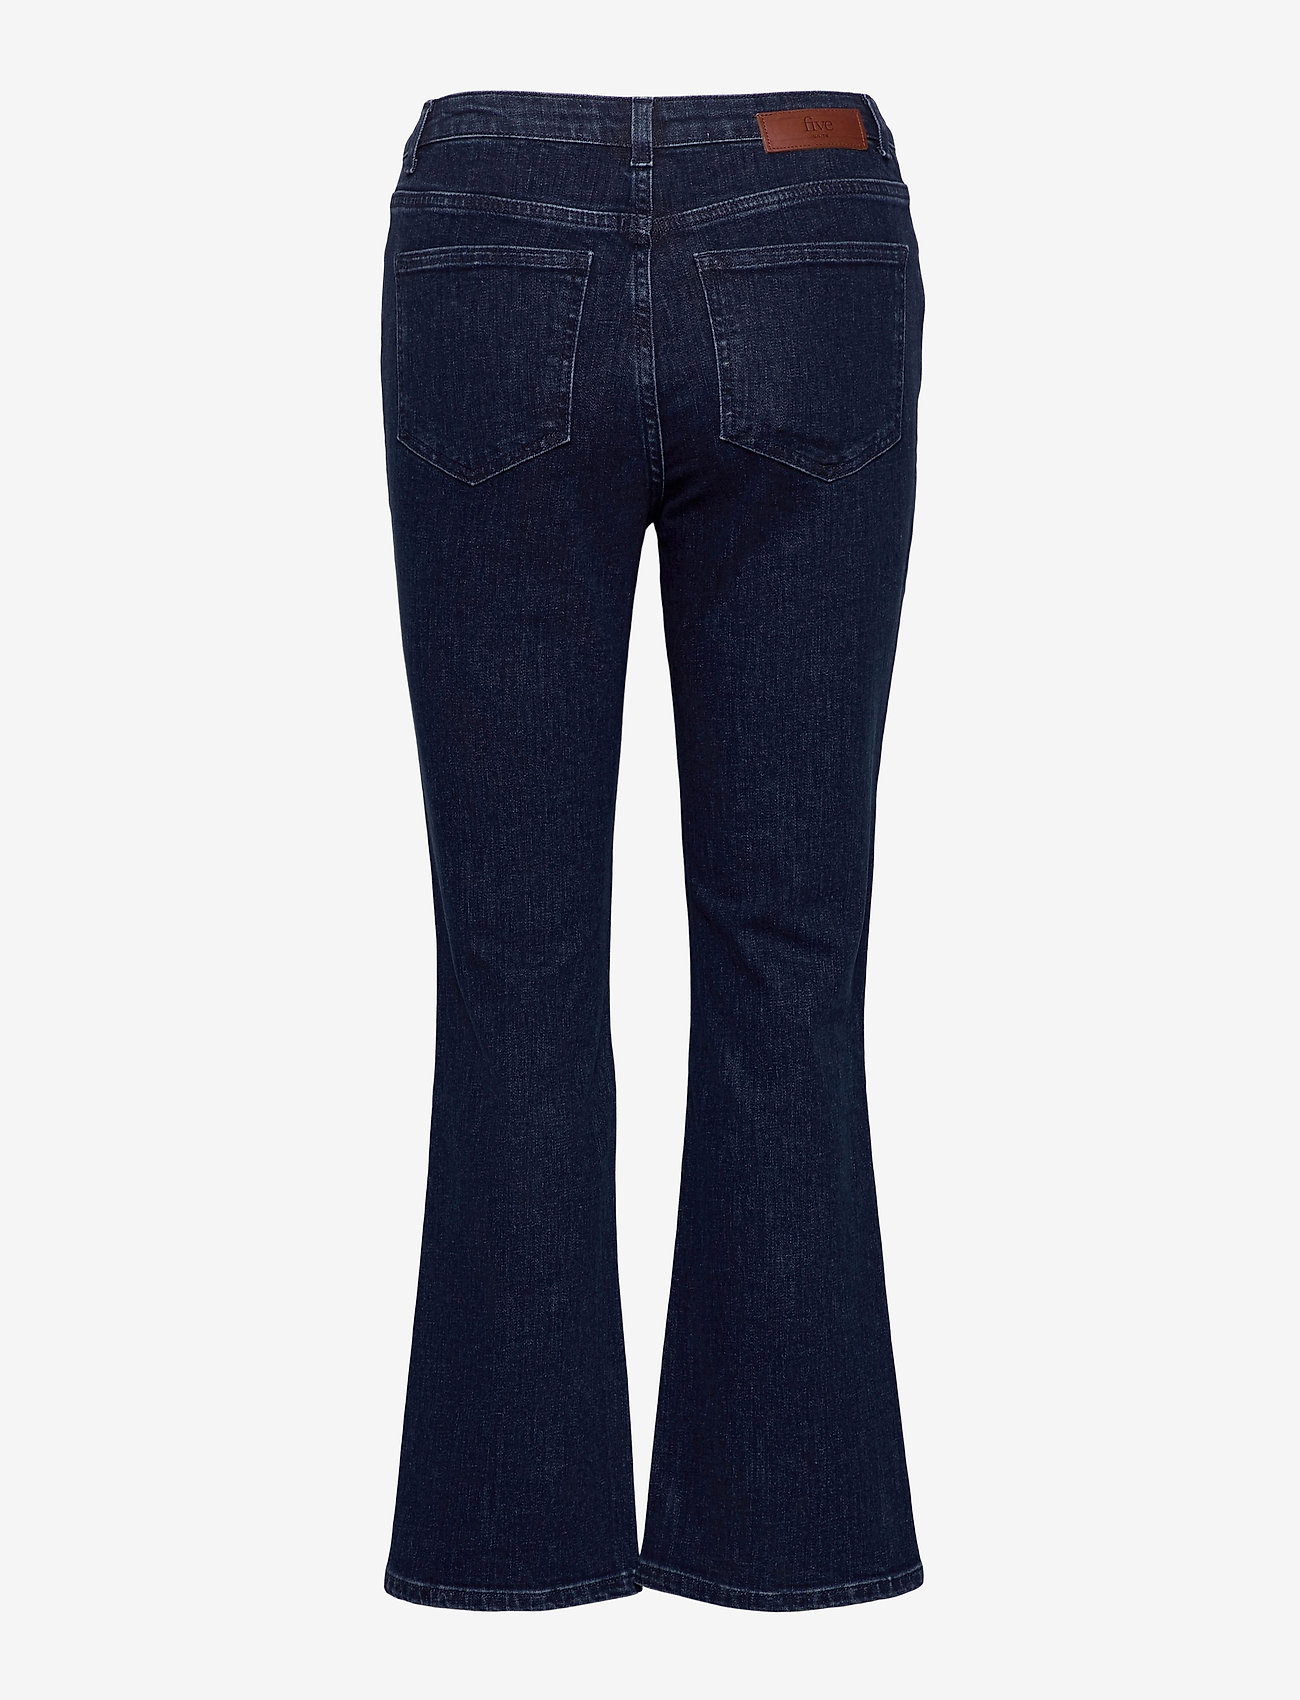 FIVEUNITS Ankle 241 Boot Cut Jeans | Boozt.com